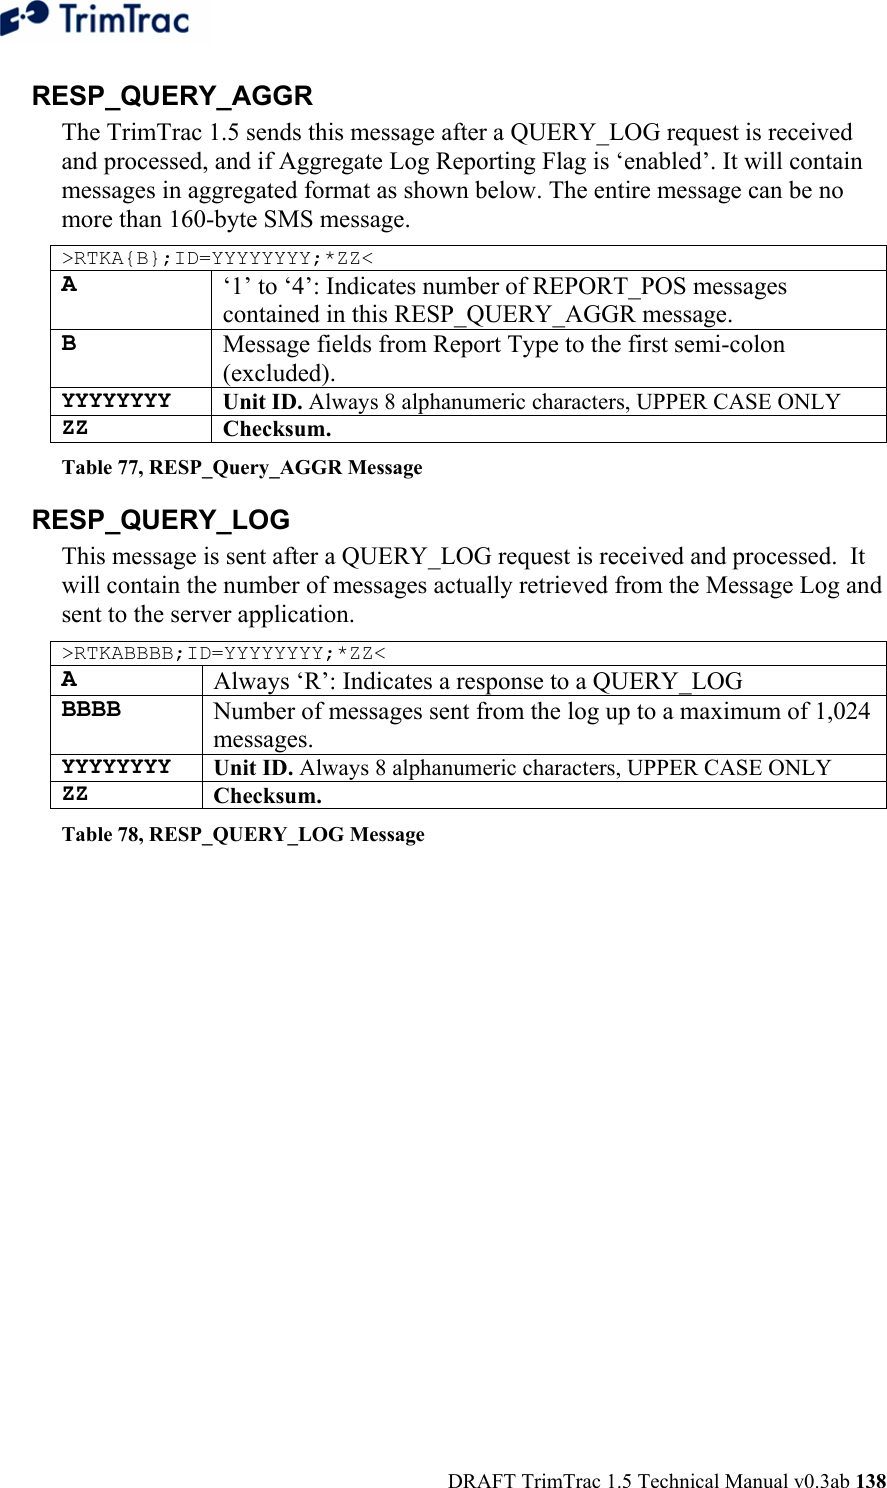  DRAFT TrimTrac 1.5 Technical Manual v0.3ab 138 RESP_QUERY_AGGR The TrimTrac 1.5 sends this message after a QUERY_LOG request is received and processed, and if Aggregate Log Reporting Flag is ‘enabled’. It will contain messages in aggregated format as shown below. The entire message can be no more than 160-byte SMS message. &gt;RTKA{B};ID=YYYYYYYY;*ZZ&lt; A ‘1’ to ‘4’: Indicates number of REPORT_POS messages contained in this RESP_QUERY_AGGR message. B Message fields from Report Type to the first semi-colon (excluded). YYYYYYYY Unit ID. Always 8 alphanumeric characters, UPPER CASE ONLY ZZ Checksum.   Table 77, RESP_Query_AGGR Message RESP_QUERY_LOG This message is sent after a QUERY_LOG request is received and processed.  It will contain the number of messages actually retrieved from the Message Log and sent to the server application. &gt;RTKABBBB;ID=YYYYYYYY;*ZZ&lt; A  Always ‘R’: Indicates a response to a QUERY_LOG BBBB  Number of messages sent from the log up to a maximum of 1,024 messages. YYYYYYYY Unit ID. Always 8 alphanumeric characters, UPPER CASE ONLY ZZ Checksum.   Table 78, RESP_QUERY_LOG Message 